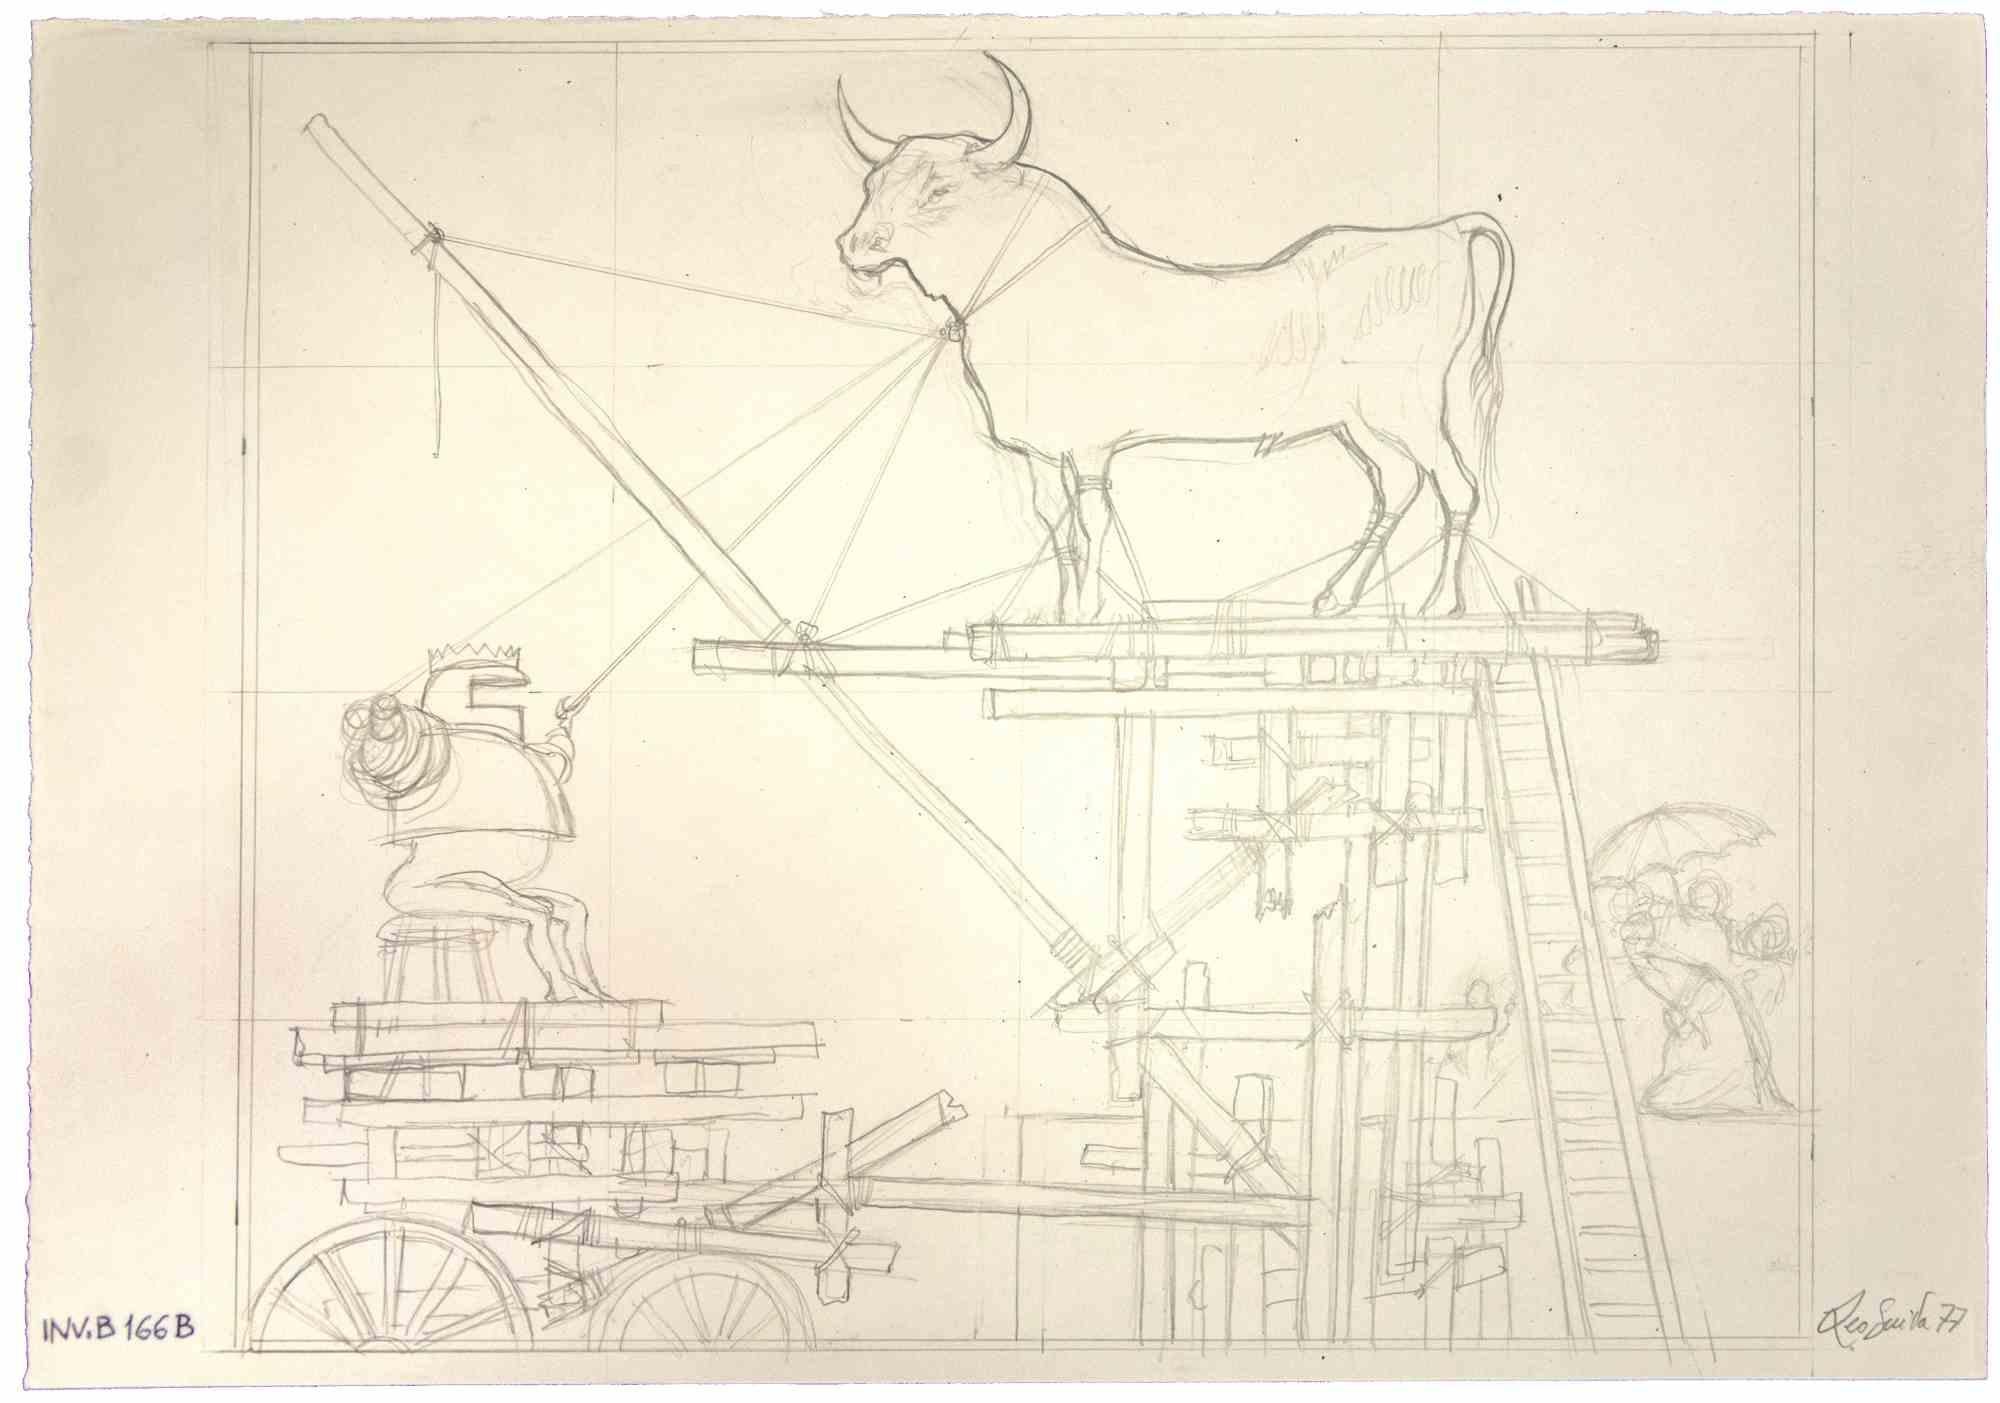 The Structure is an original artwork realized  in 1977  by the italian Contemporary artist  Leo Guida  (1992 - 2017).

Original drawing pencil on ivory-colored paper.
 
Hand-signed and dated on the lower margin. Cat. INV.B 166B

In this artwork are